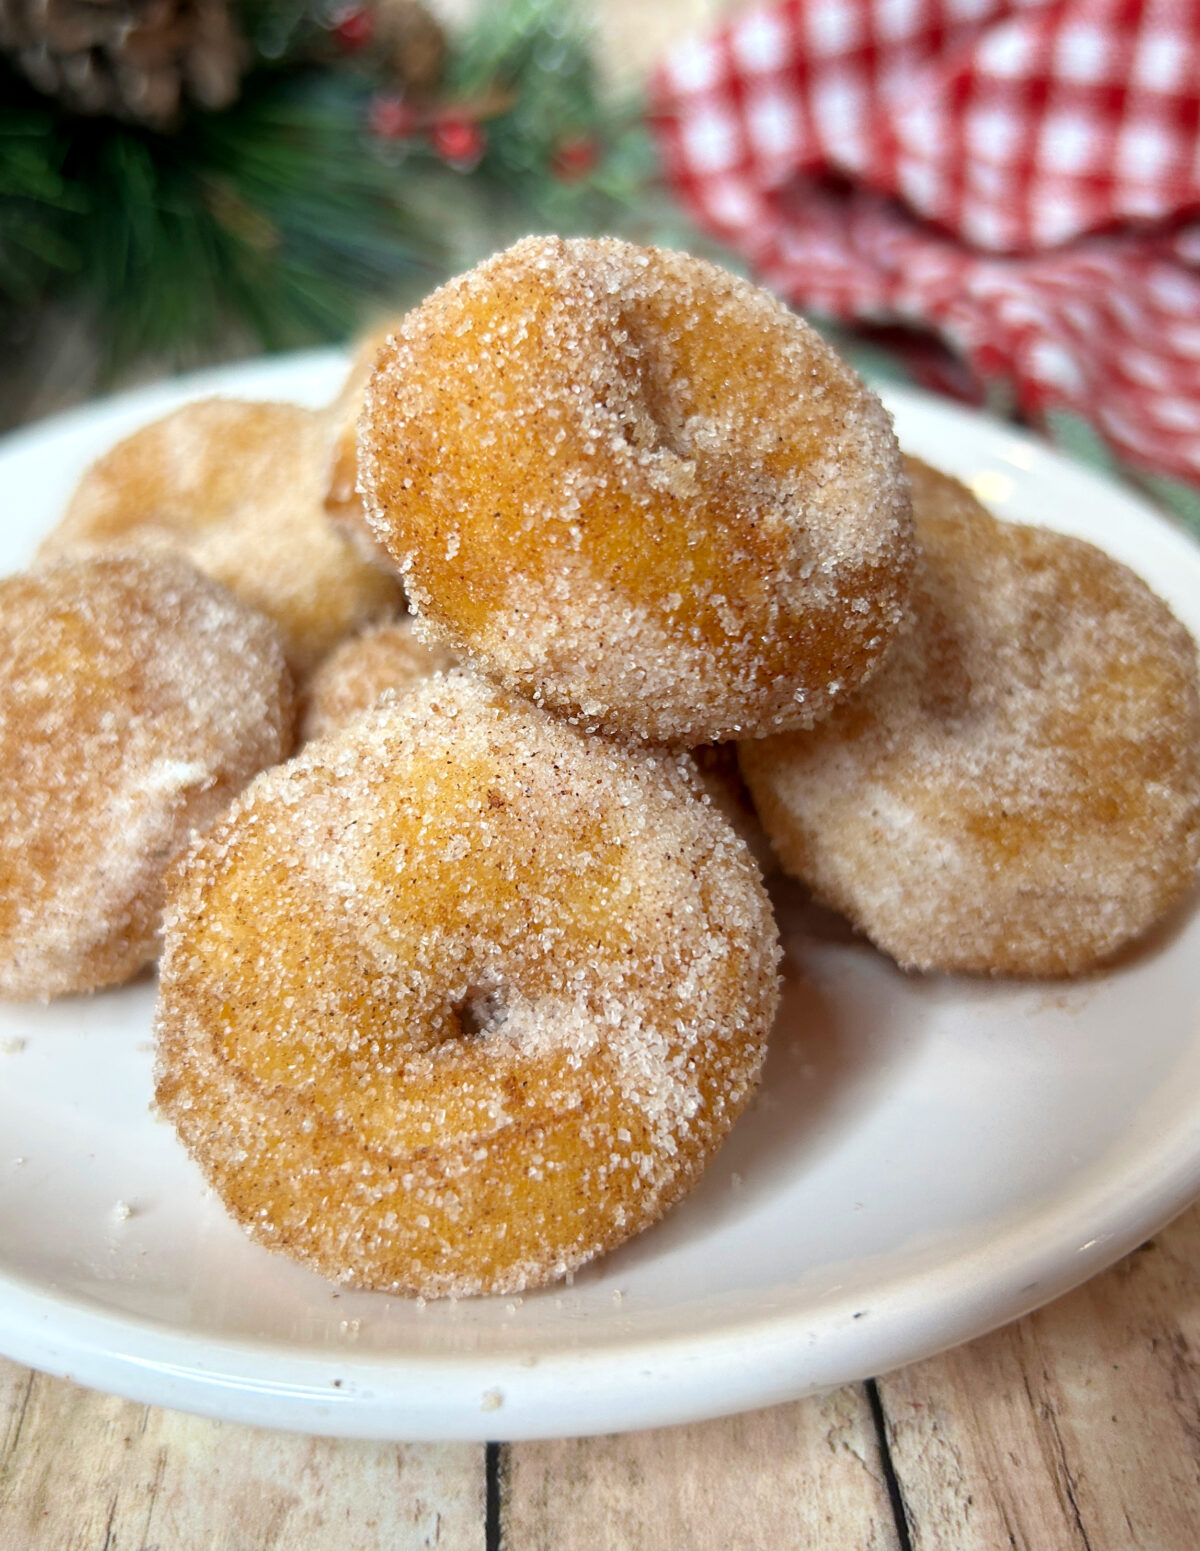 These delicious mini eggnog donuts are bite-sized, and full of flavour and holiday cheer; they're the perfect party treat or cozy snack.